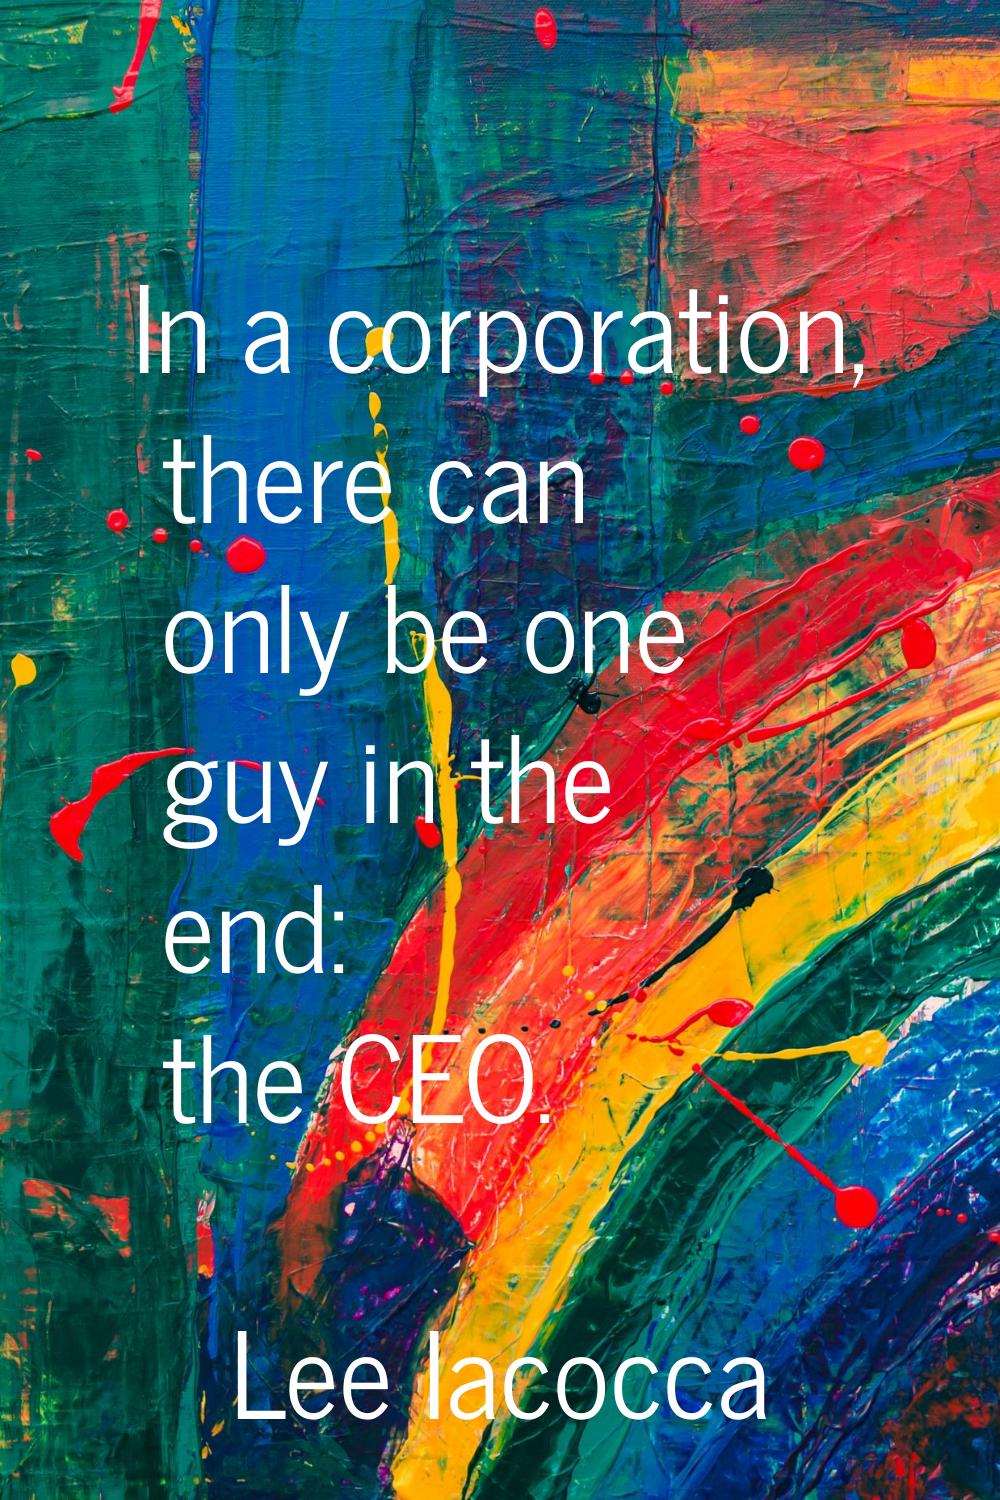 In a corporation, there can only be one guy in the end: the CEO.